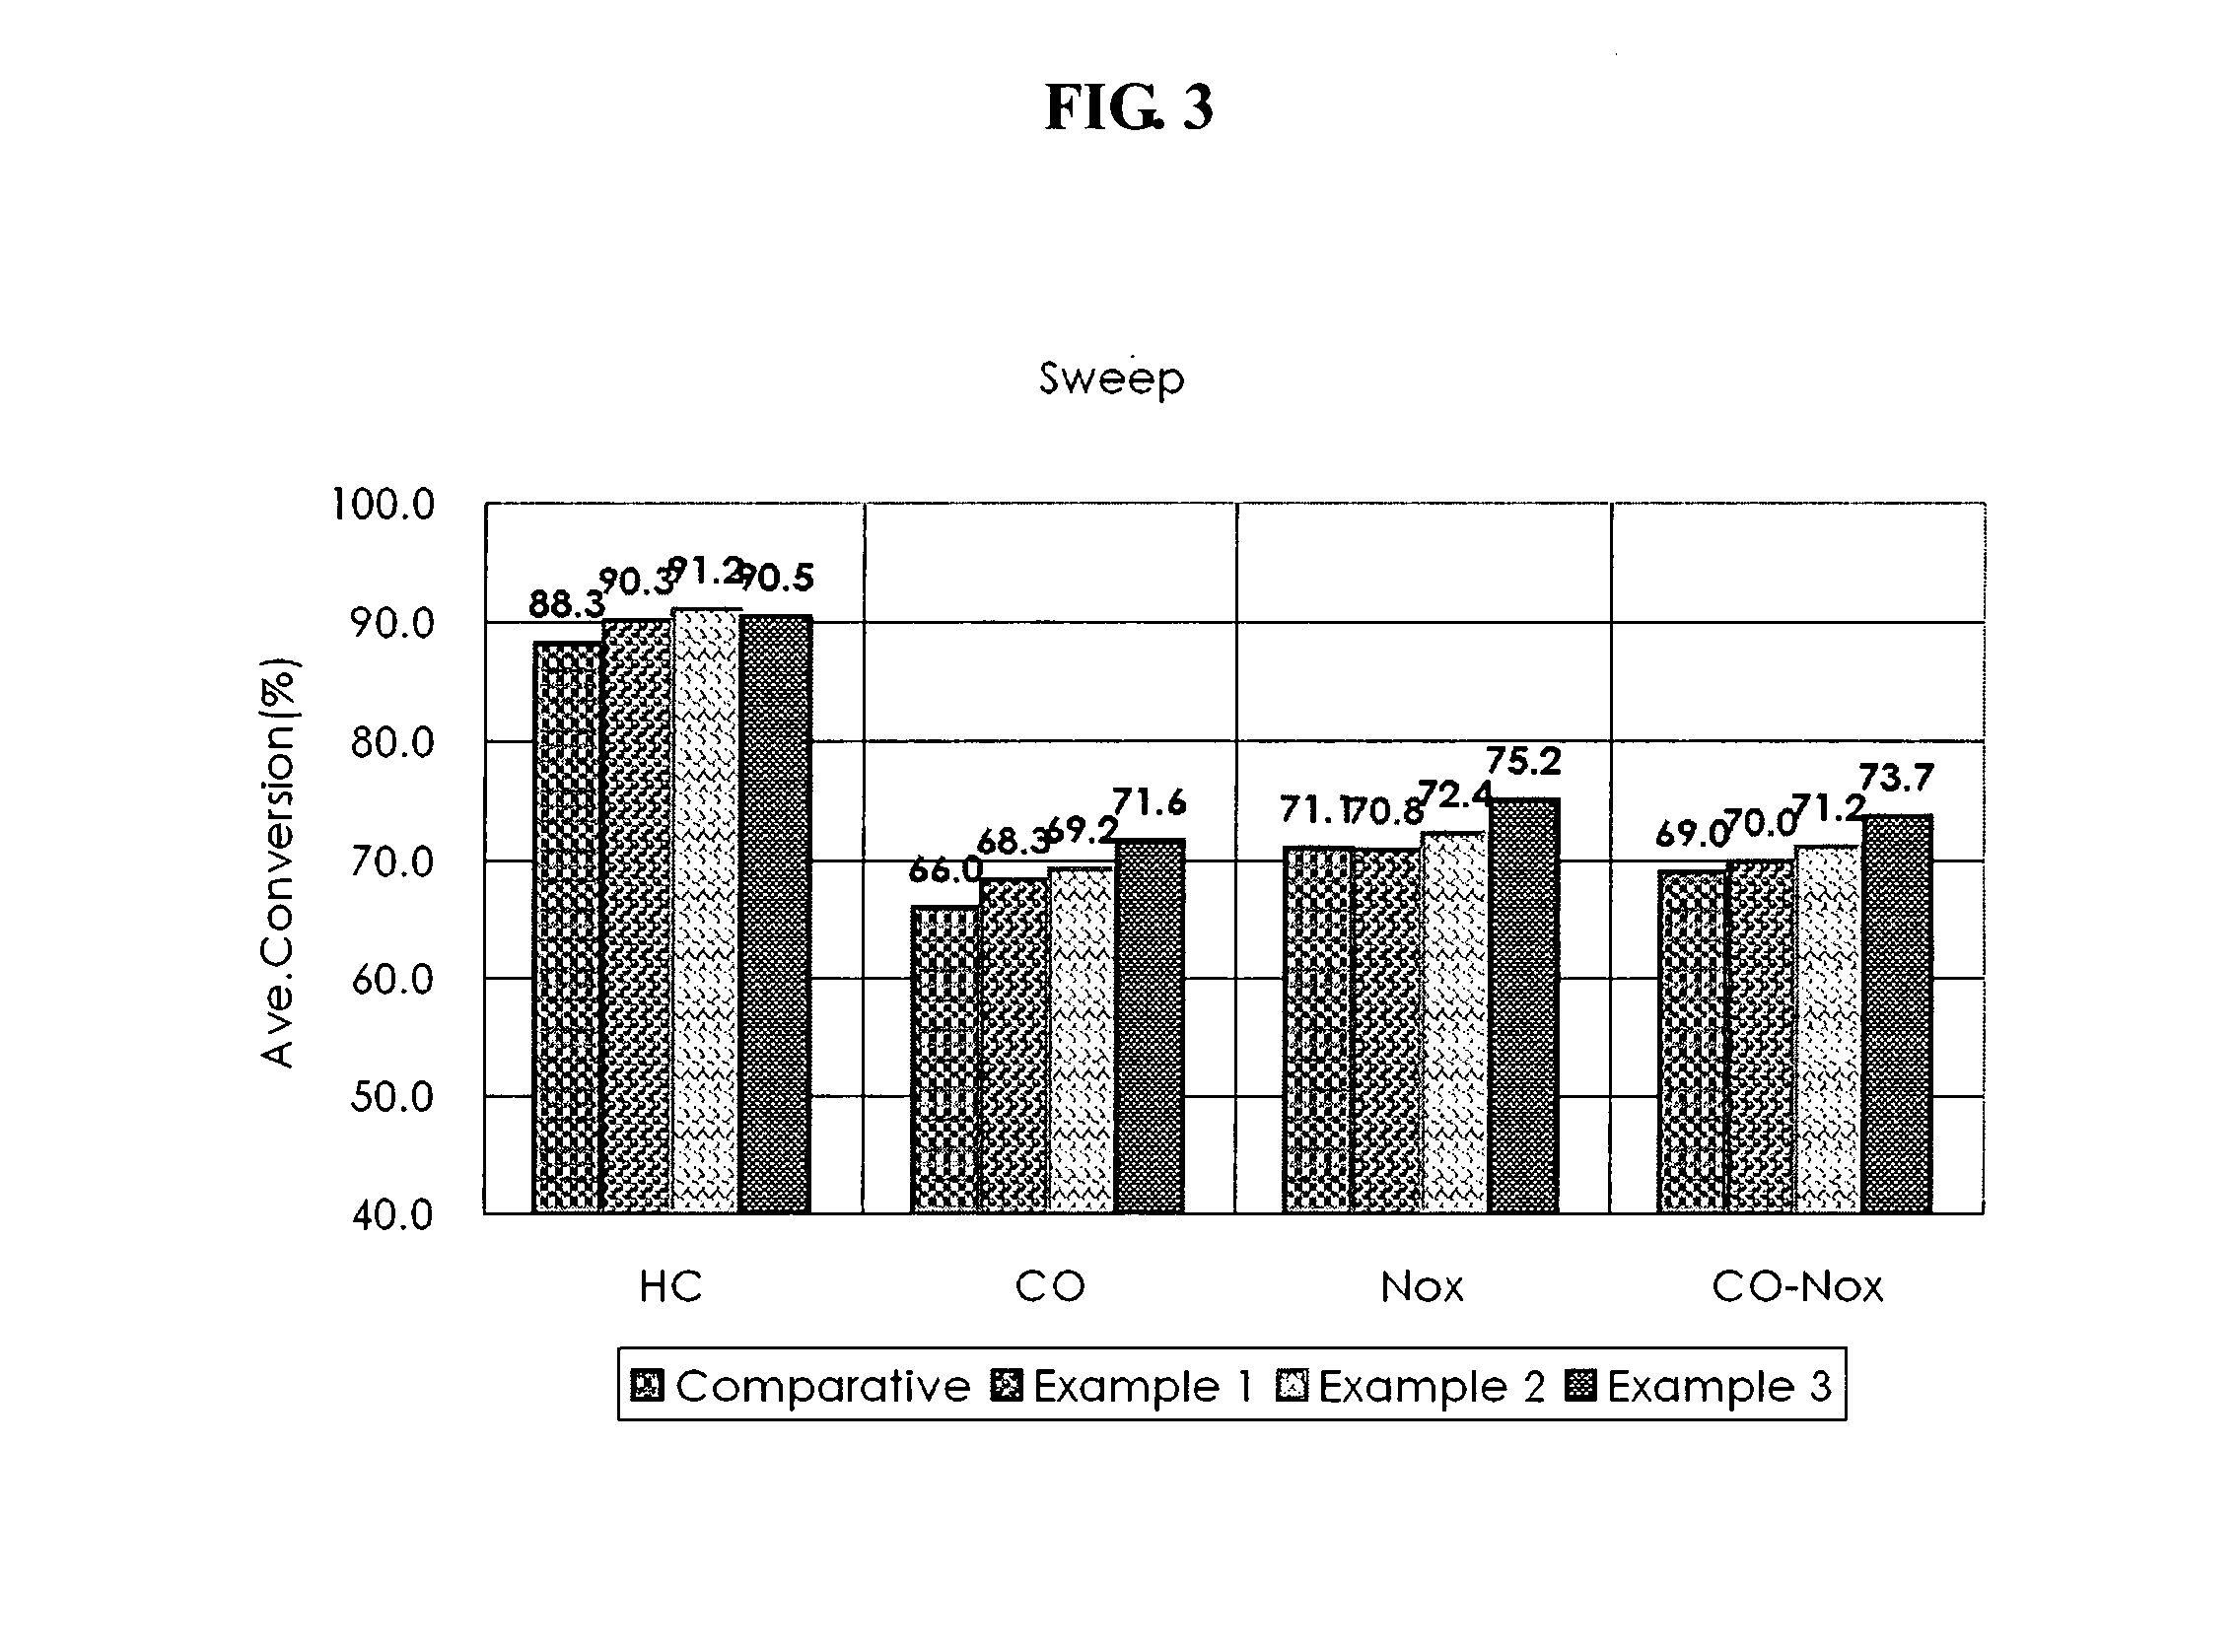 Catalyst containing little or no rhodium for purifying exhaust gases of internal combustion engine